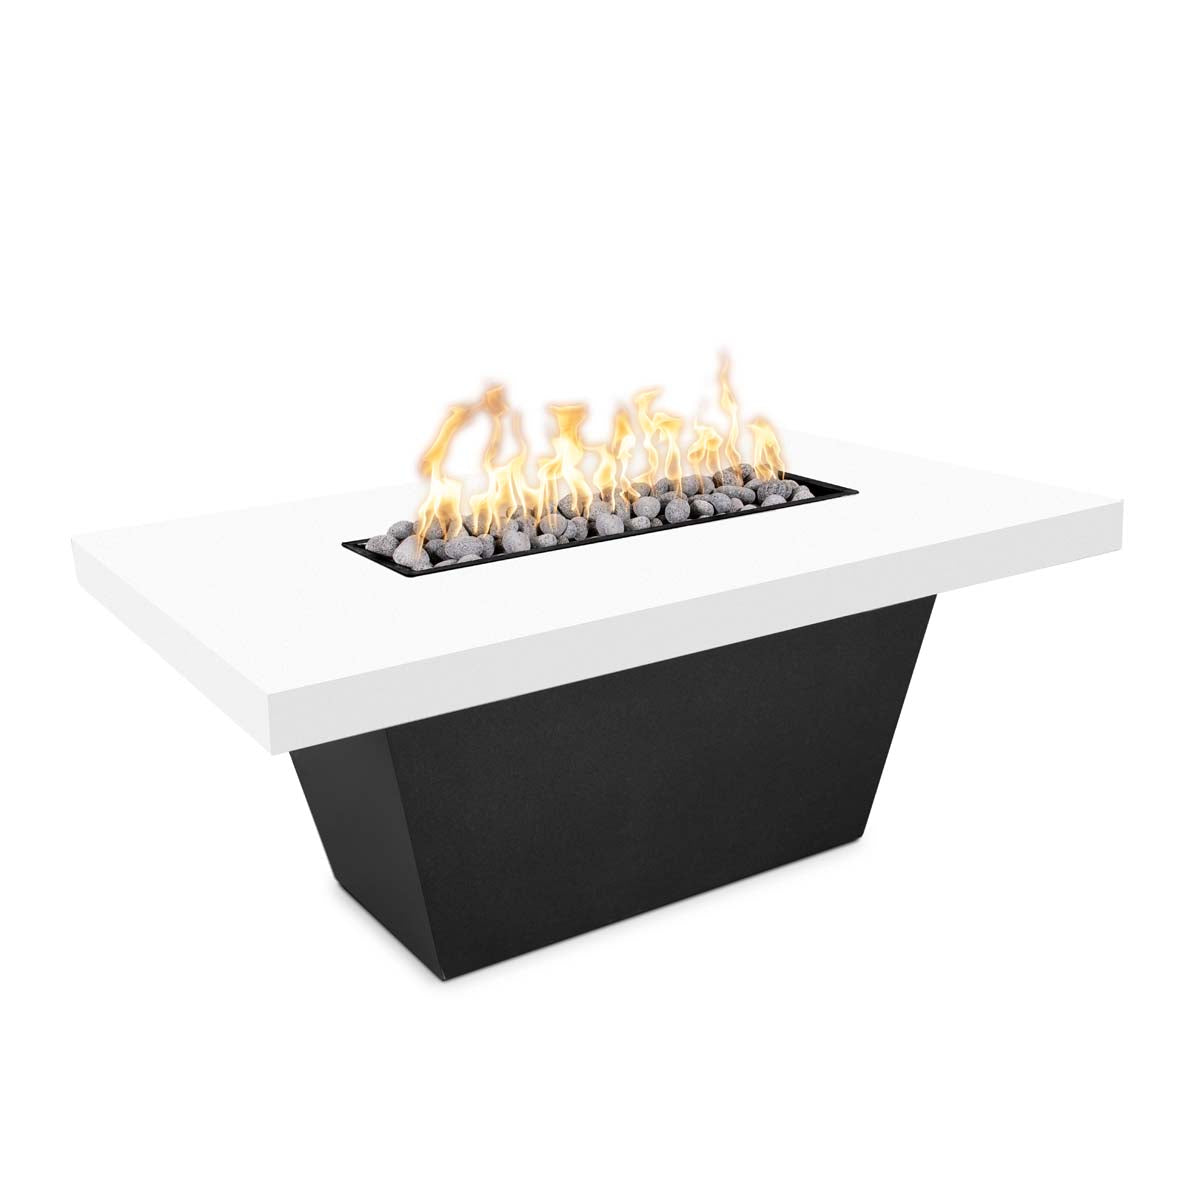 Tacoma Metal Fire Table 48" x 30" - Electronic Ignition